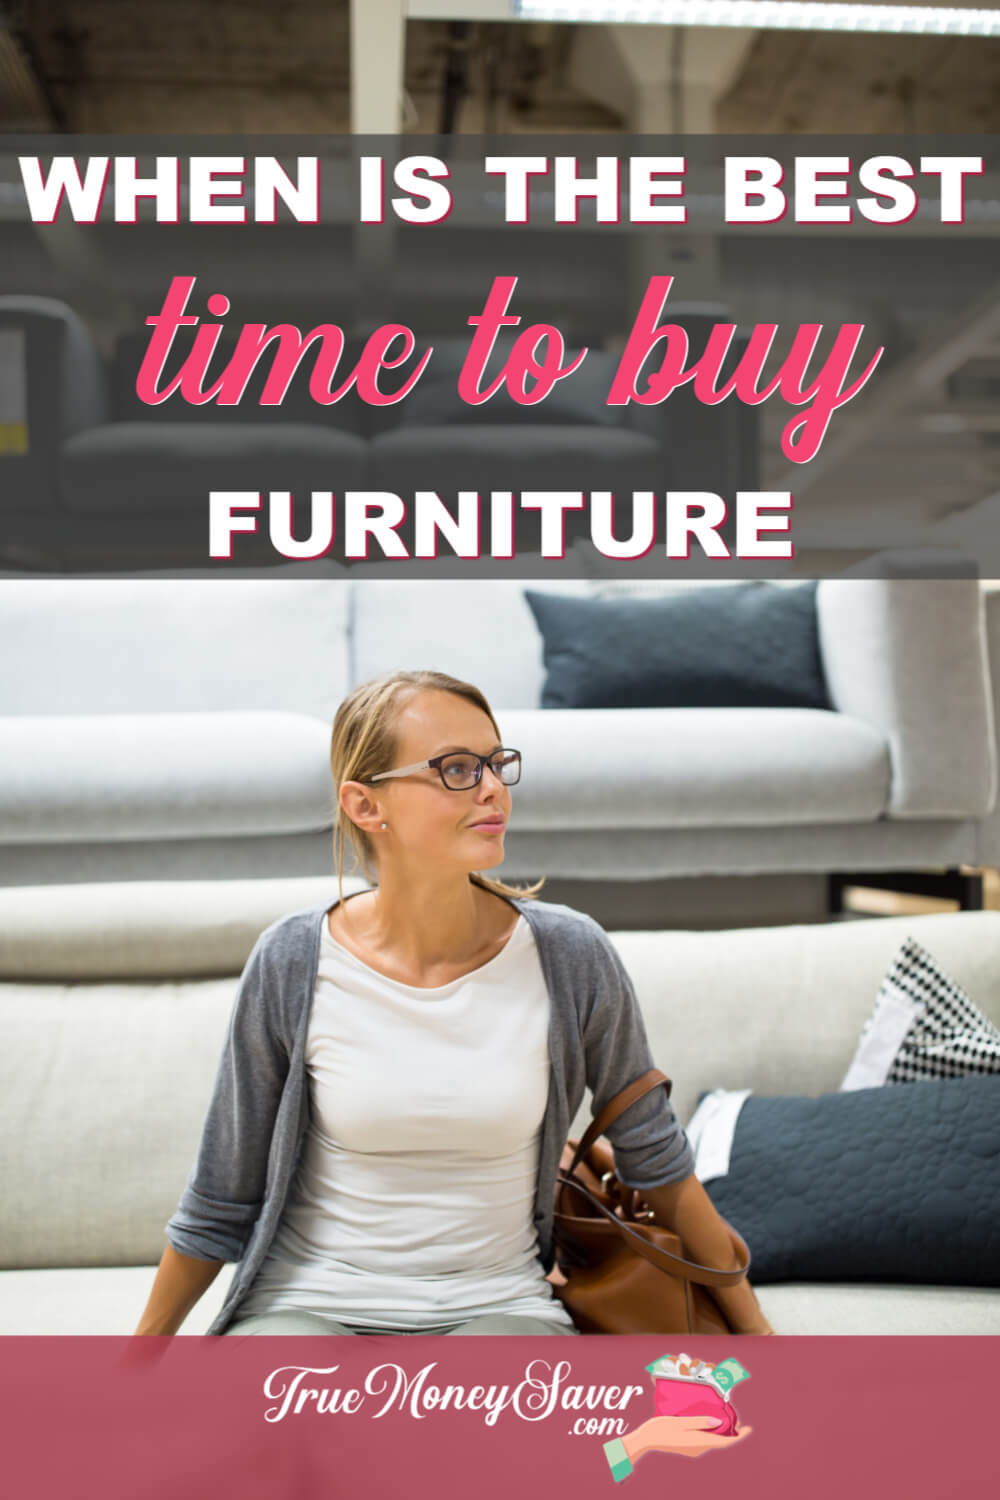 When Is The Best Time To Buy Furniture This Year?